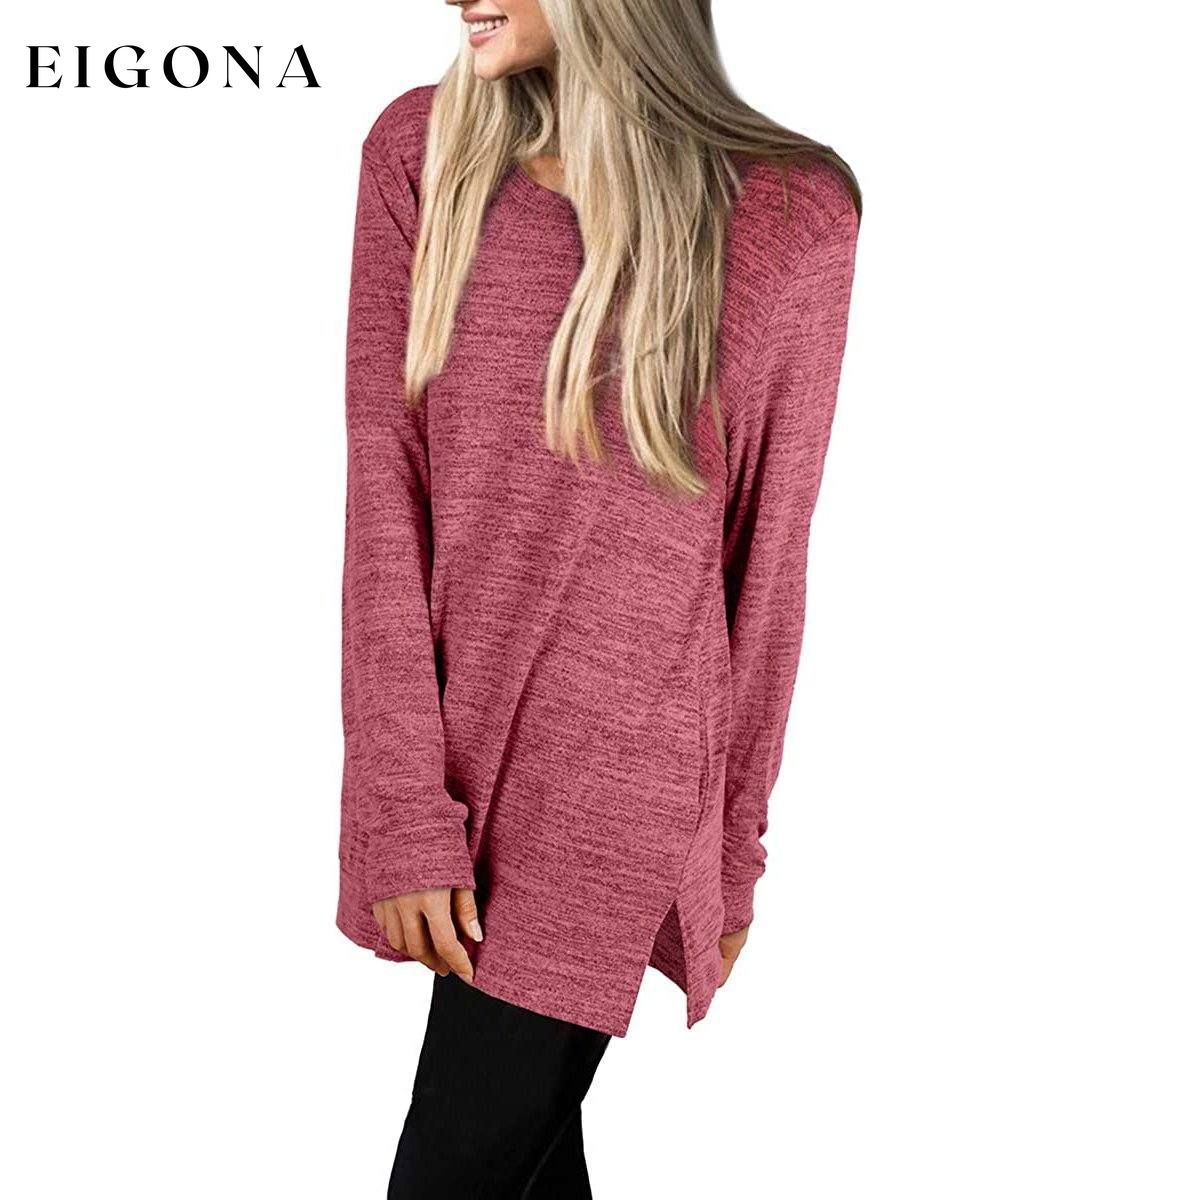 Women's Casual Sweatshirts Long Sleeve Oversized Shirt __stock:50 clothes refund_fee:1200 tops